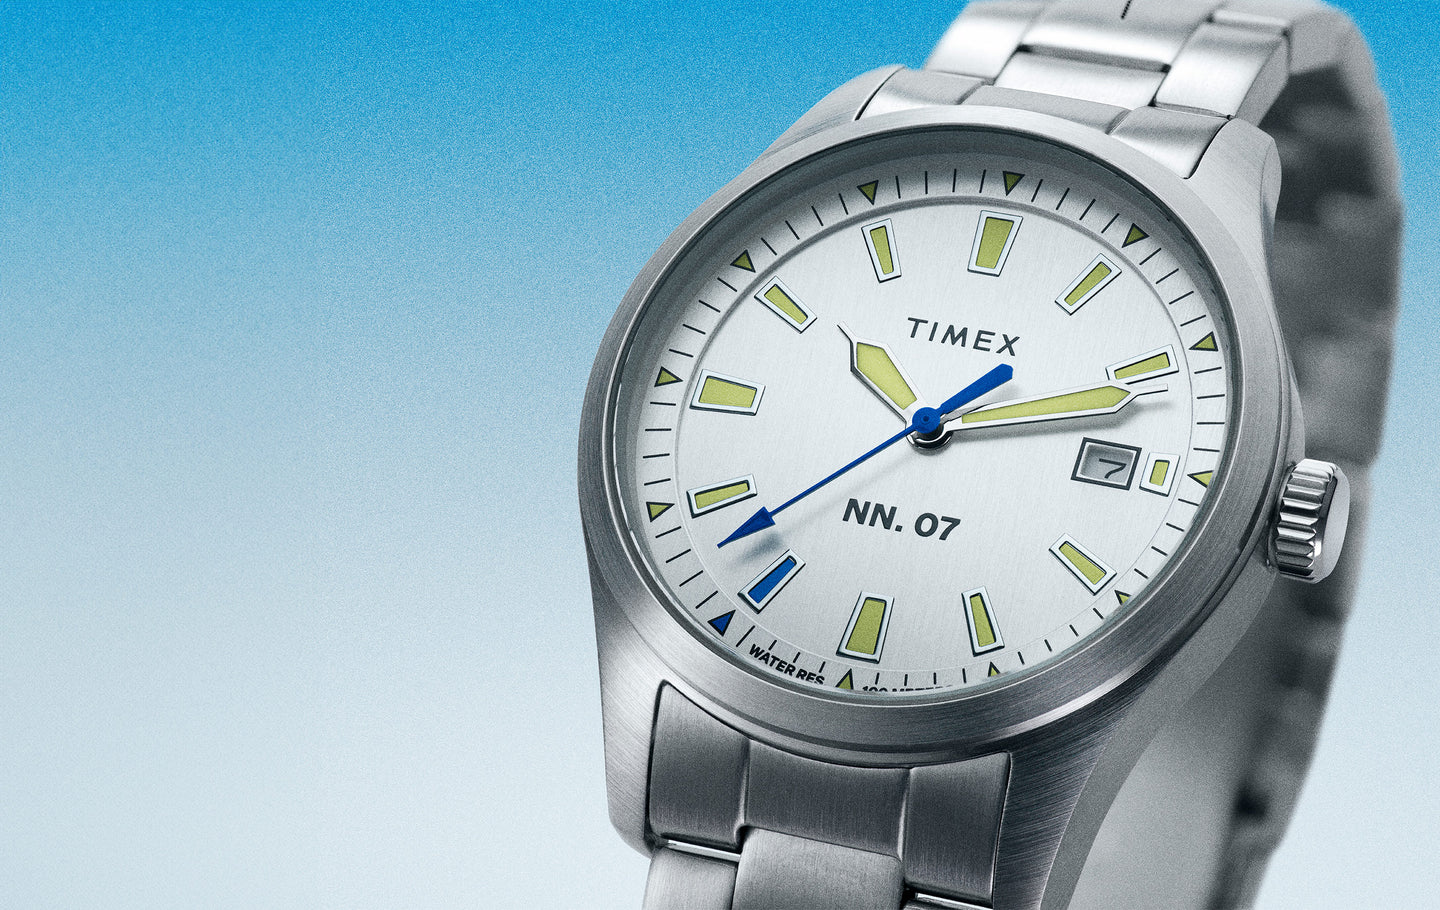 Timex x NN.07 watch displayed with a silver dial and intricate details such as a blue sweep.  The watch is angled on a blue and white ombre background.